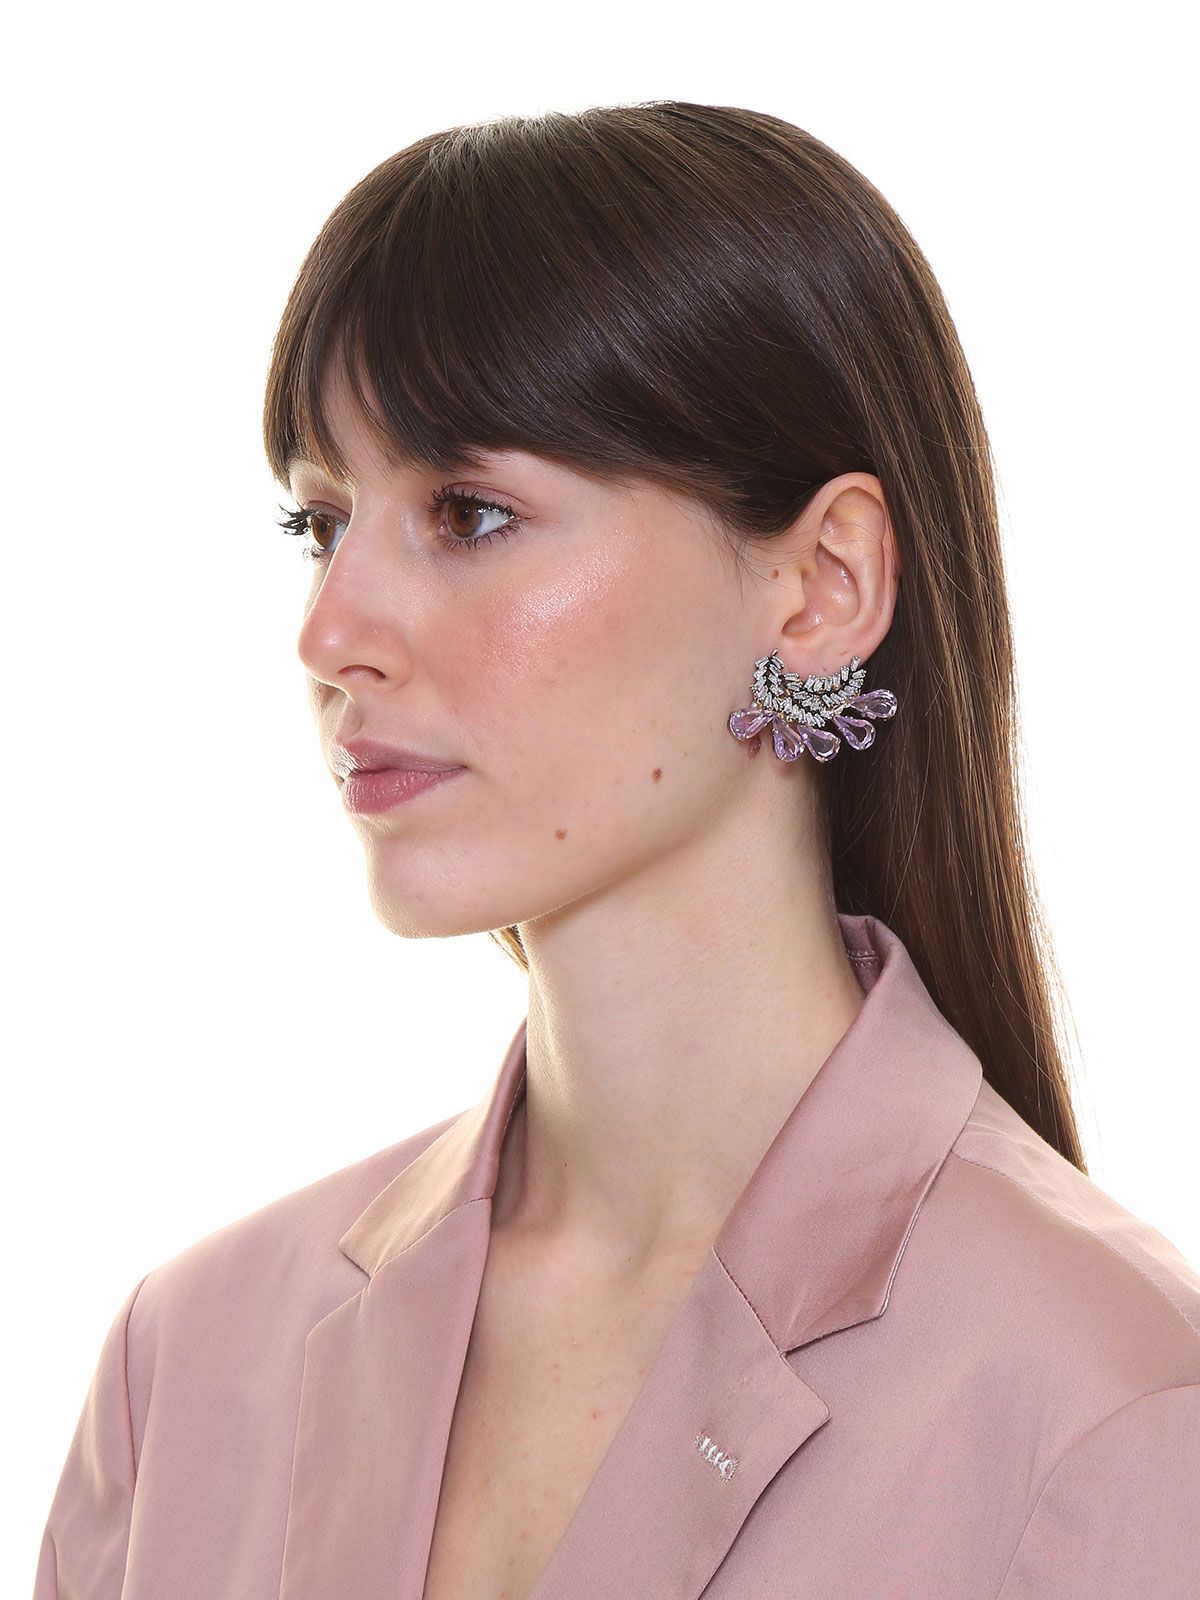  Stone earrings with bunch of baguettes and glass drops